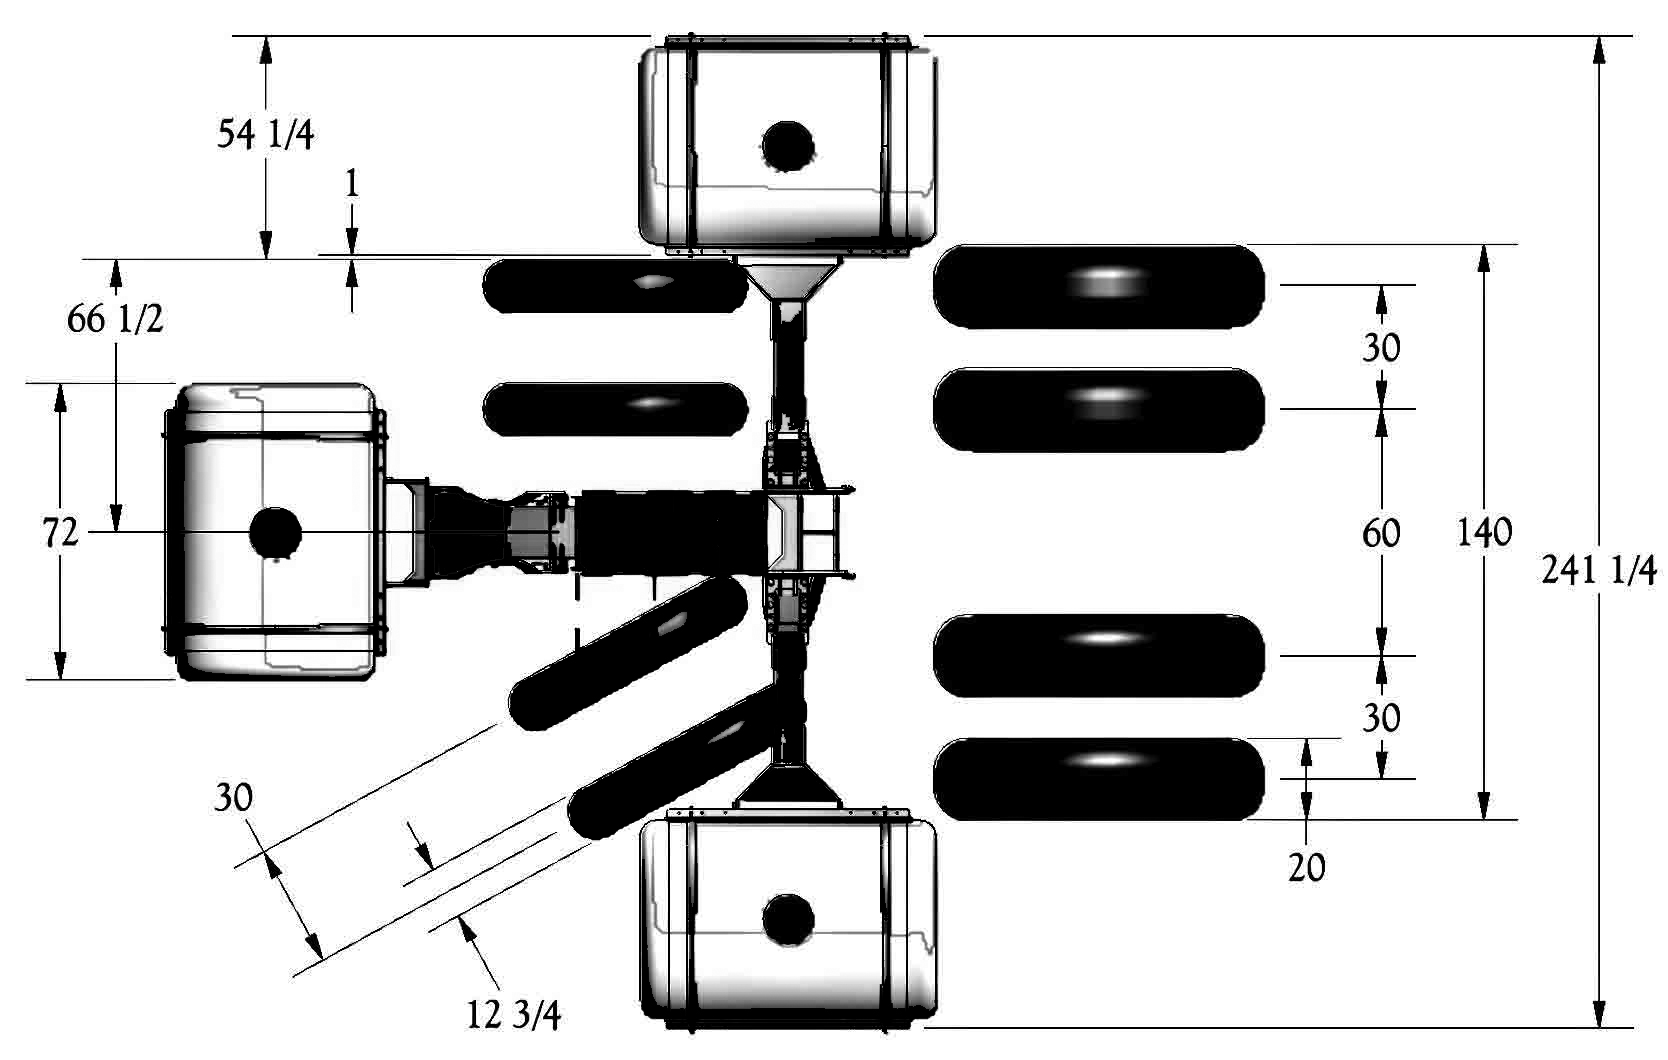 Front Dual Helicopter Tank Dimensions